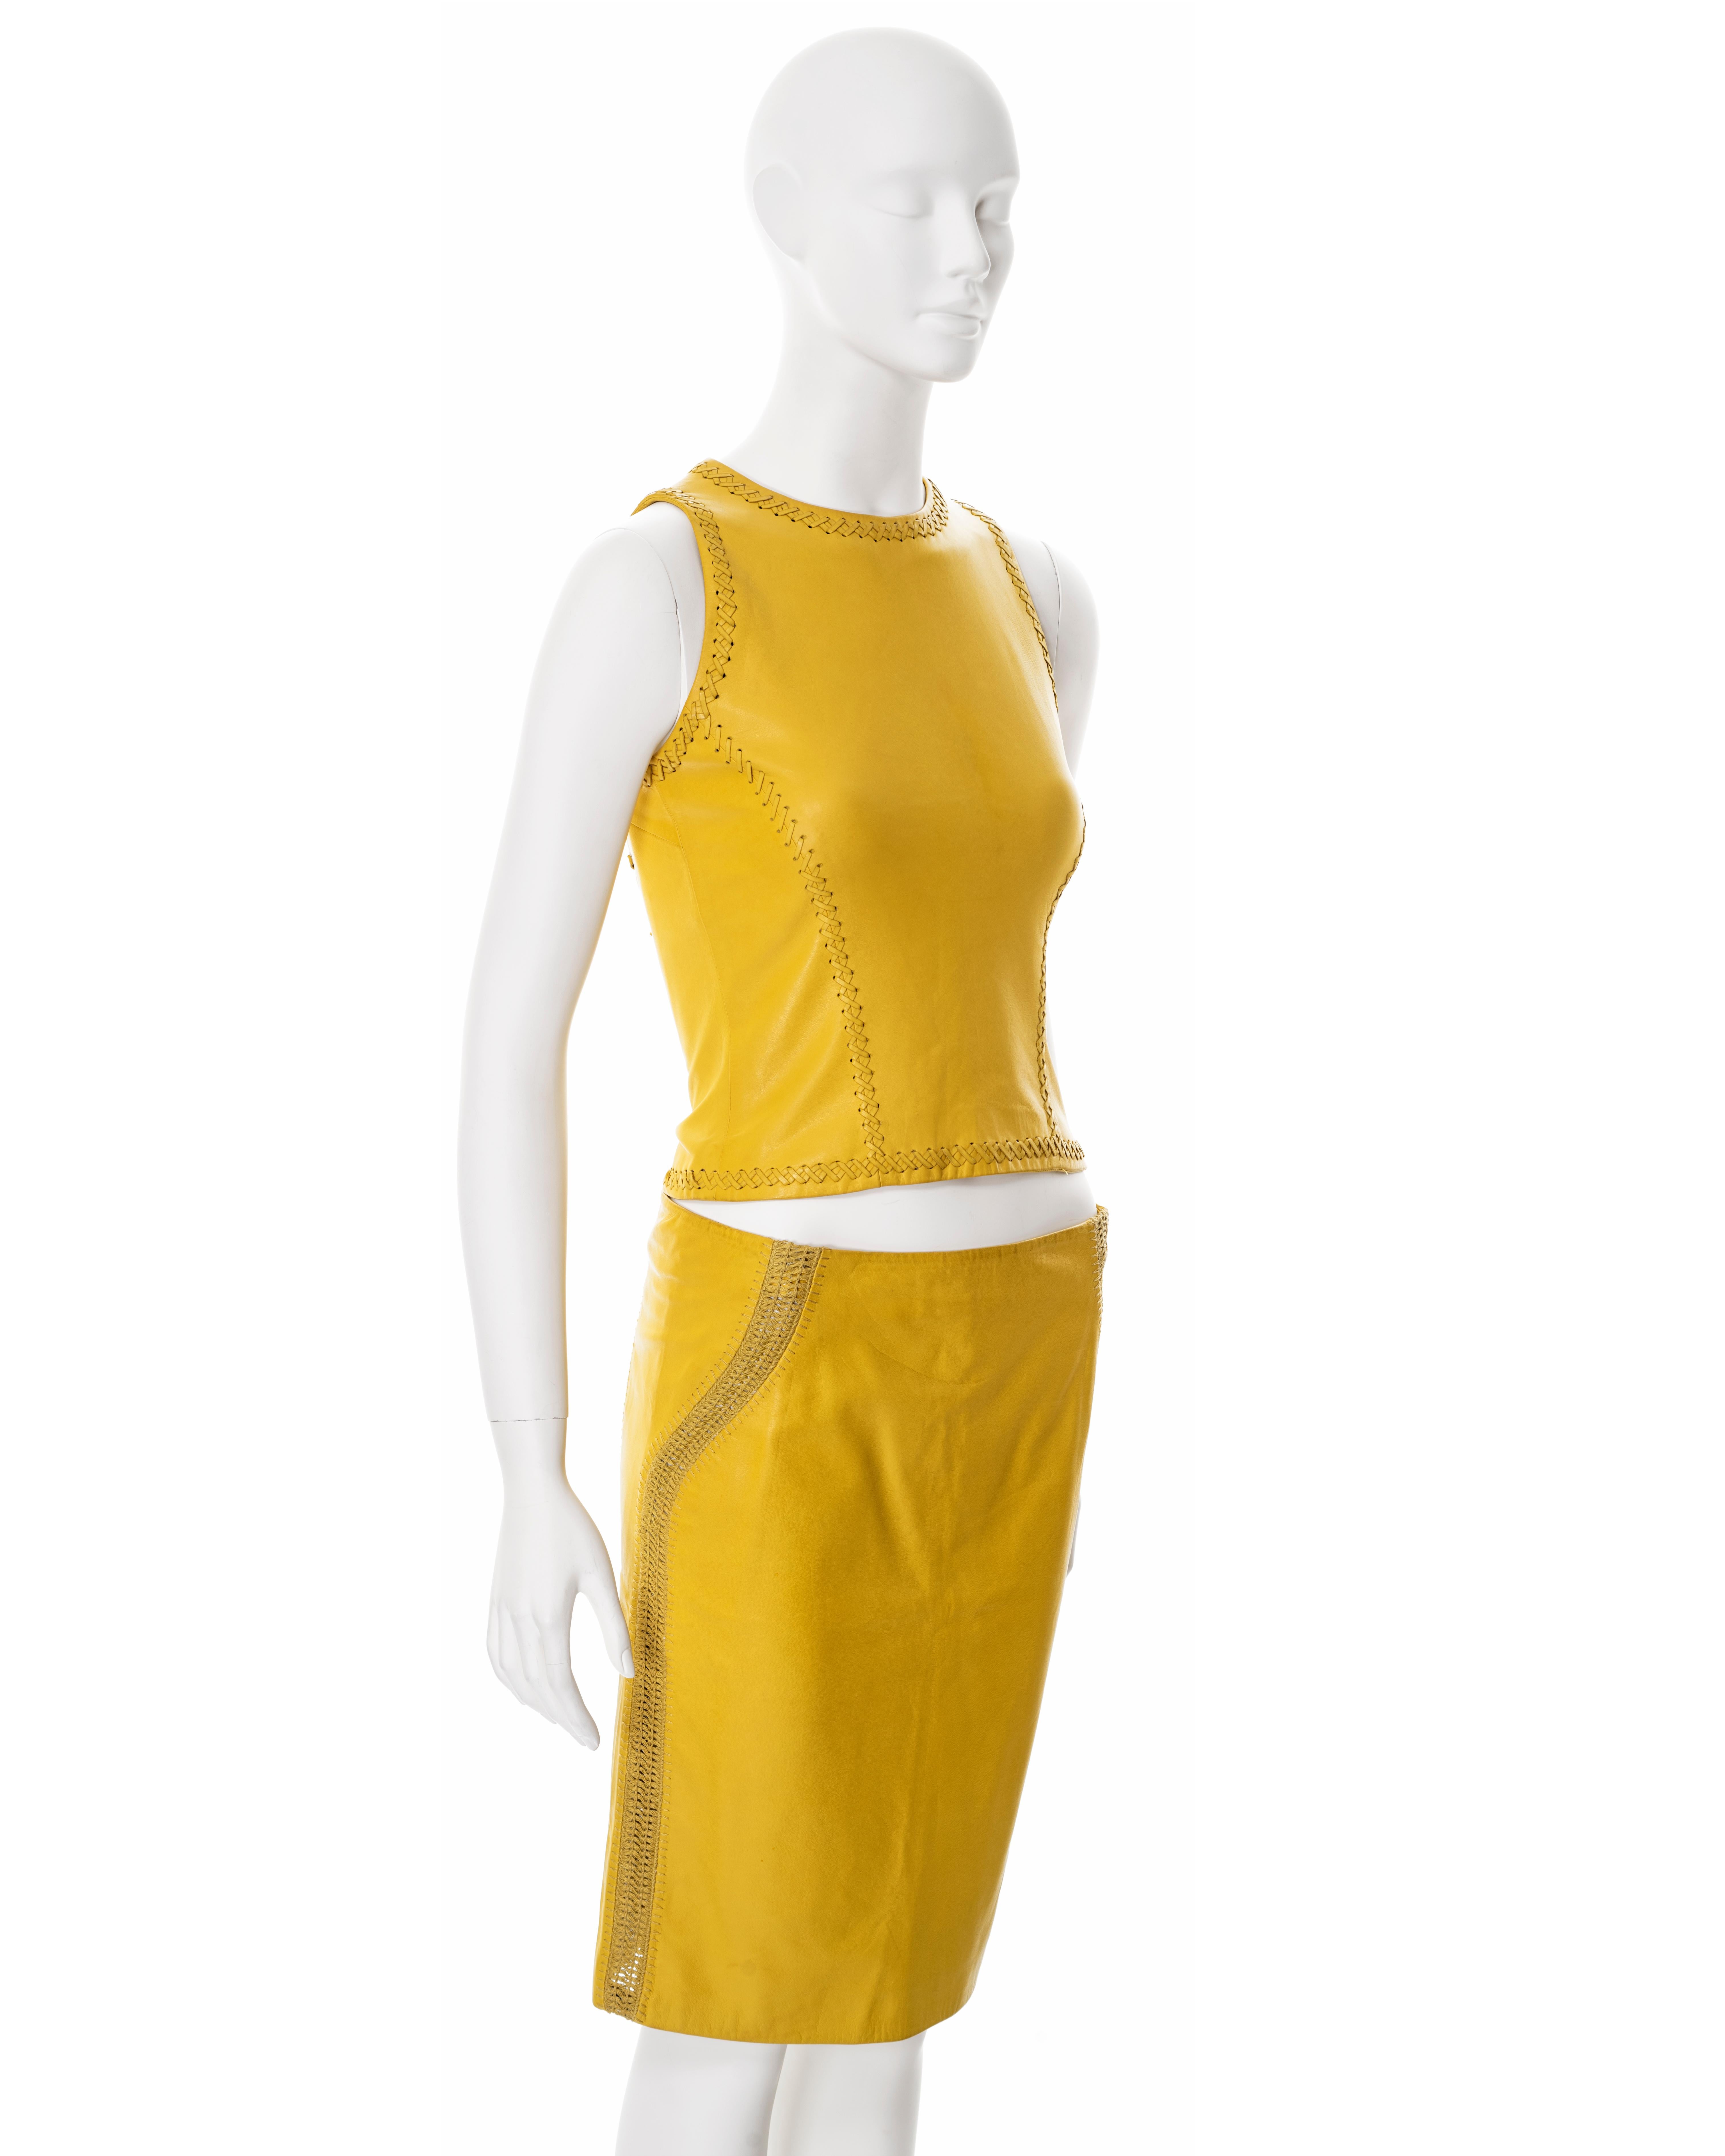 Women's Gianni Versace yellow lambskin leather top and skirt, ss 2003 For Sale